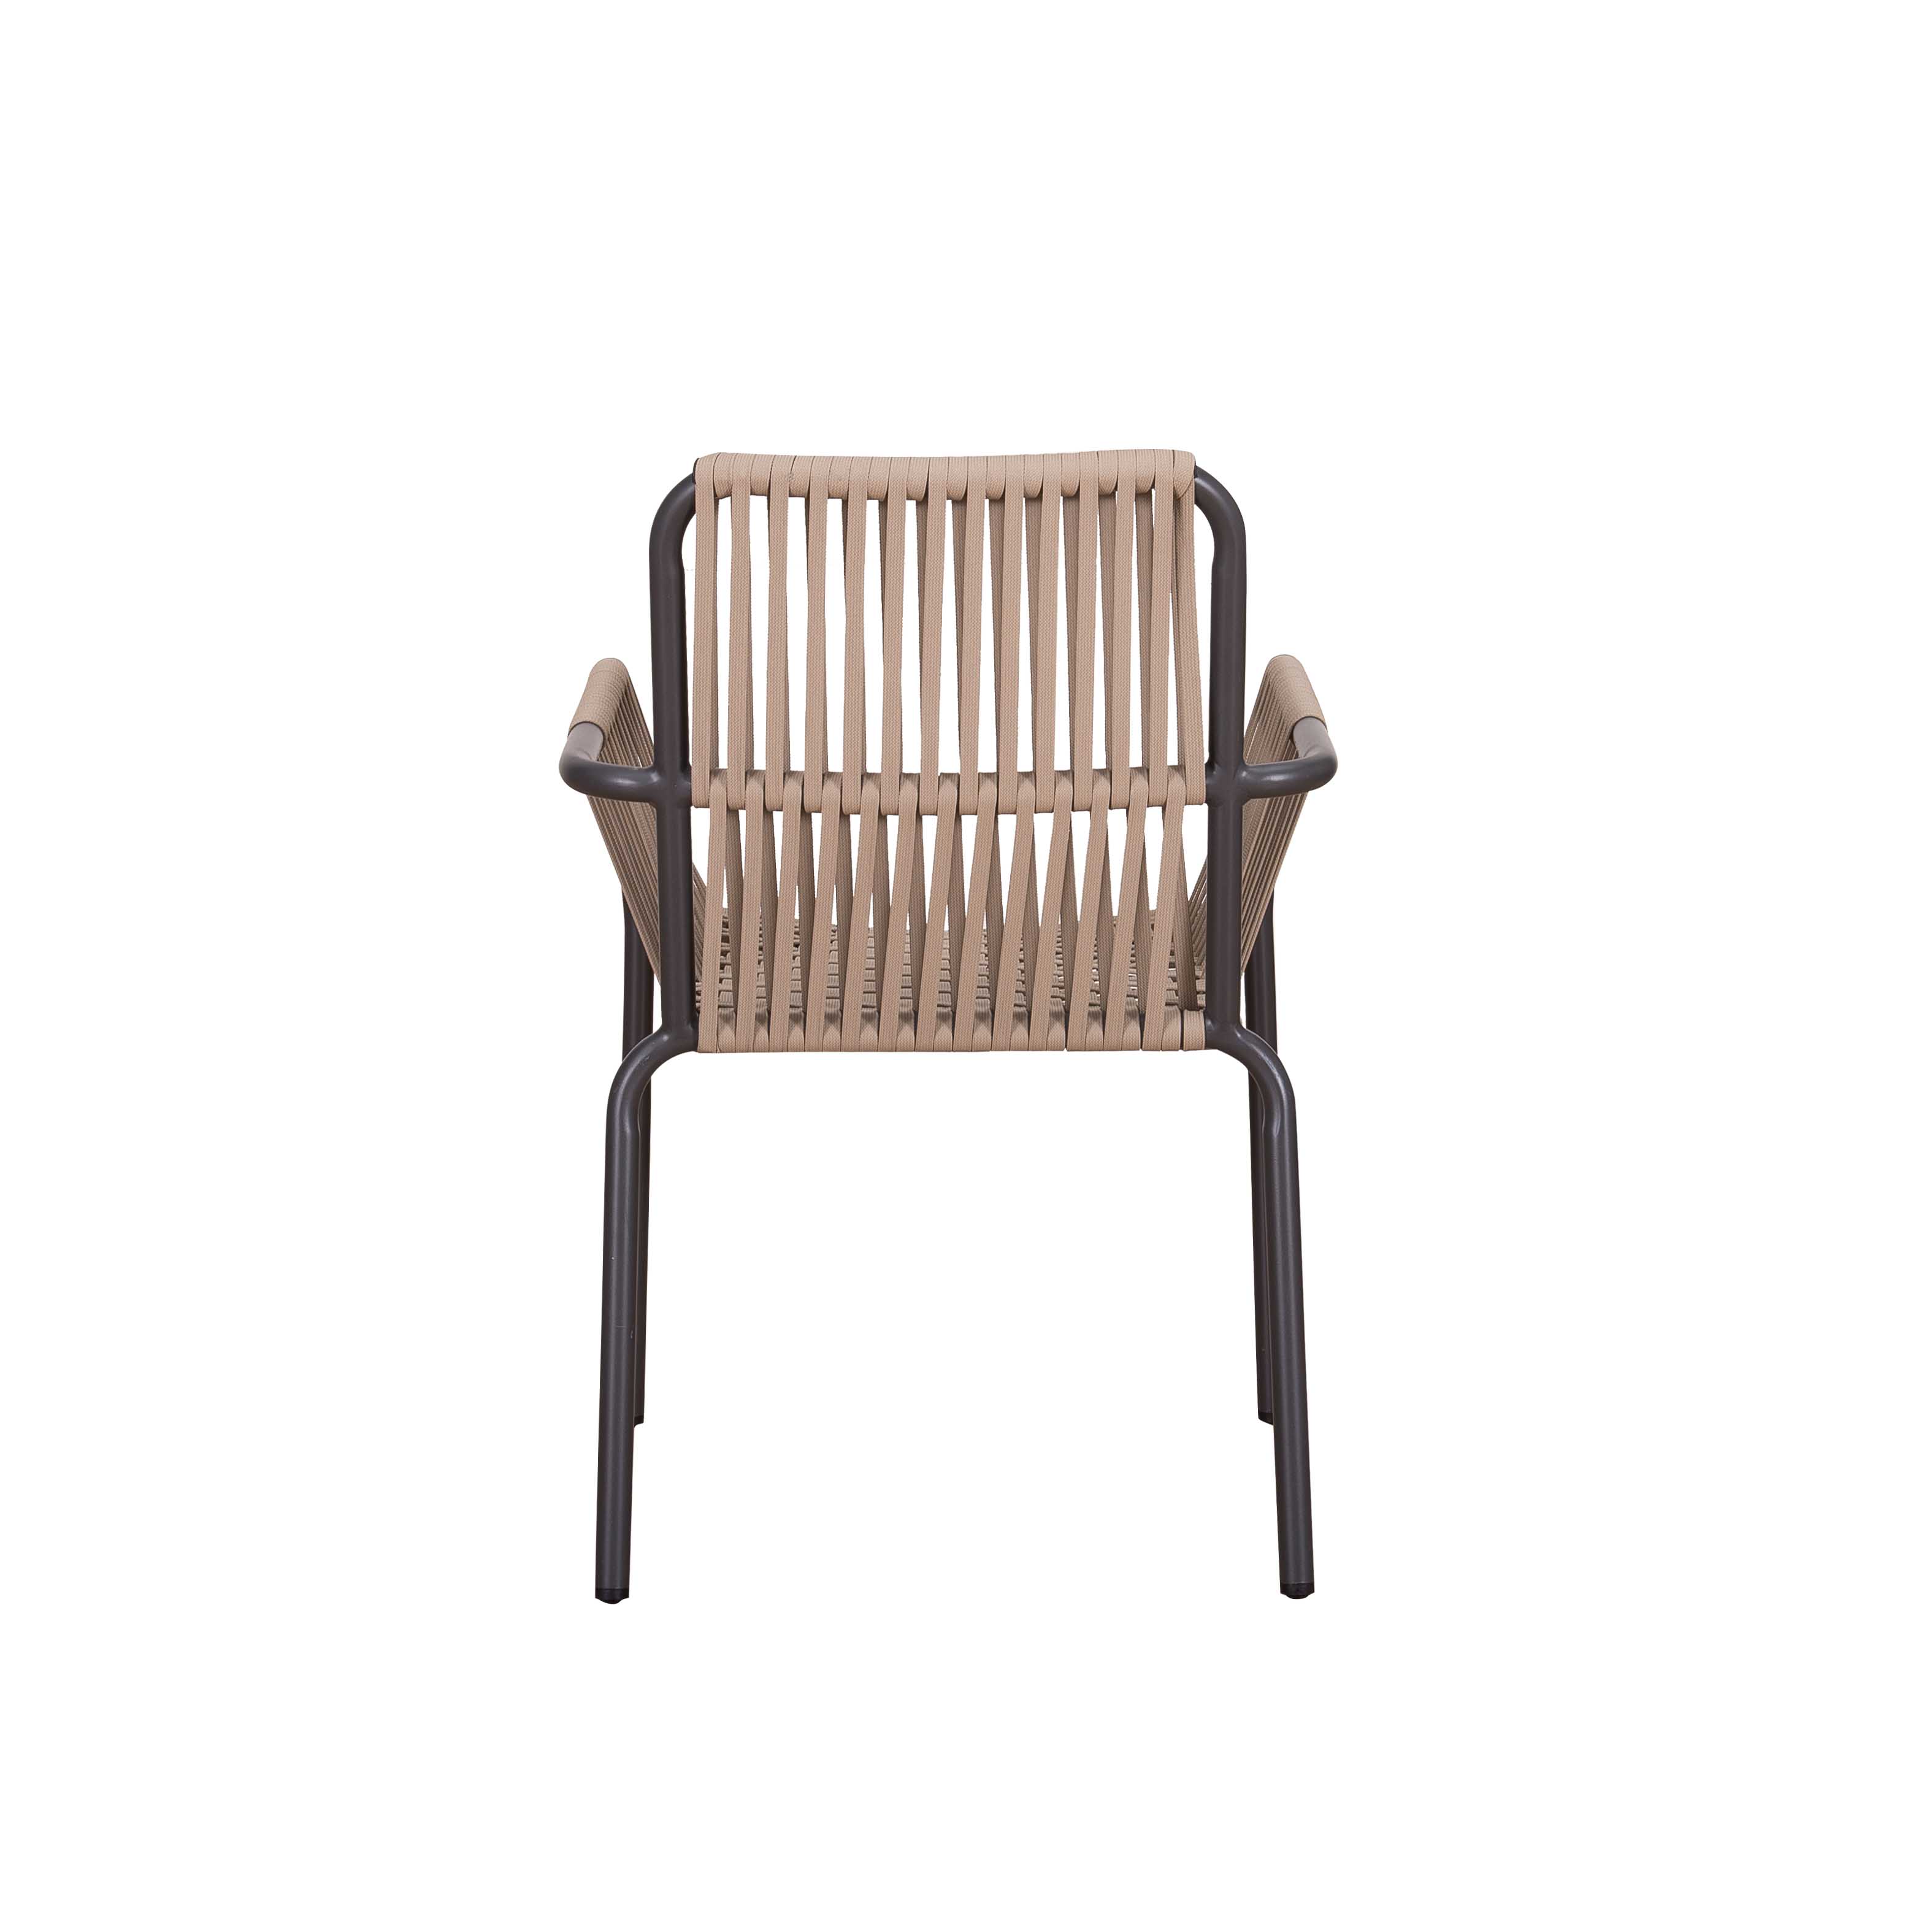 Lincoln rope chair S6